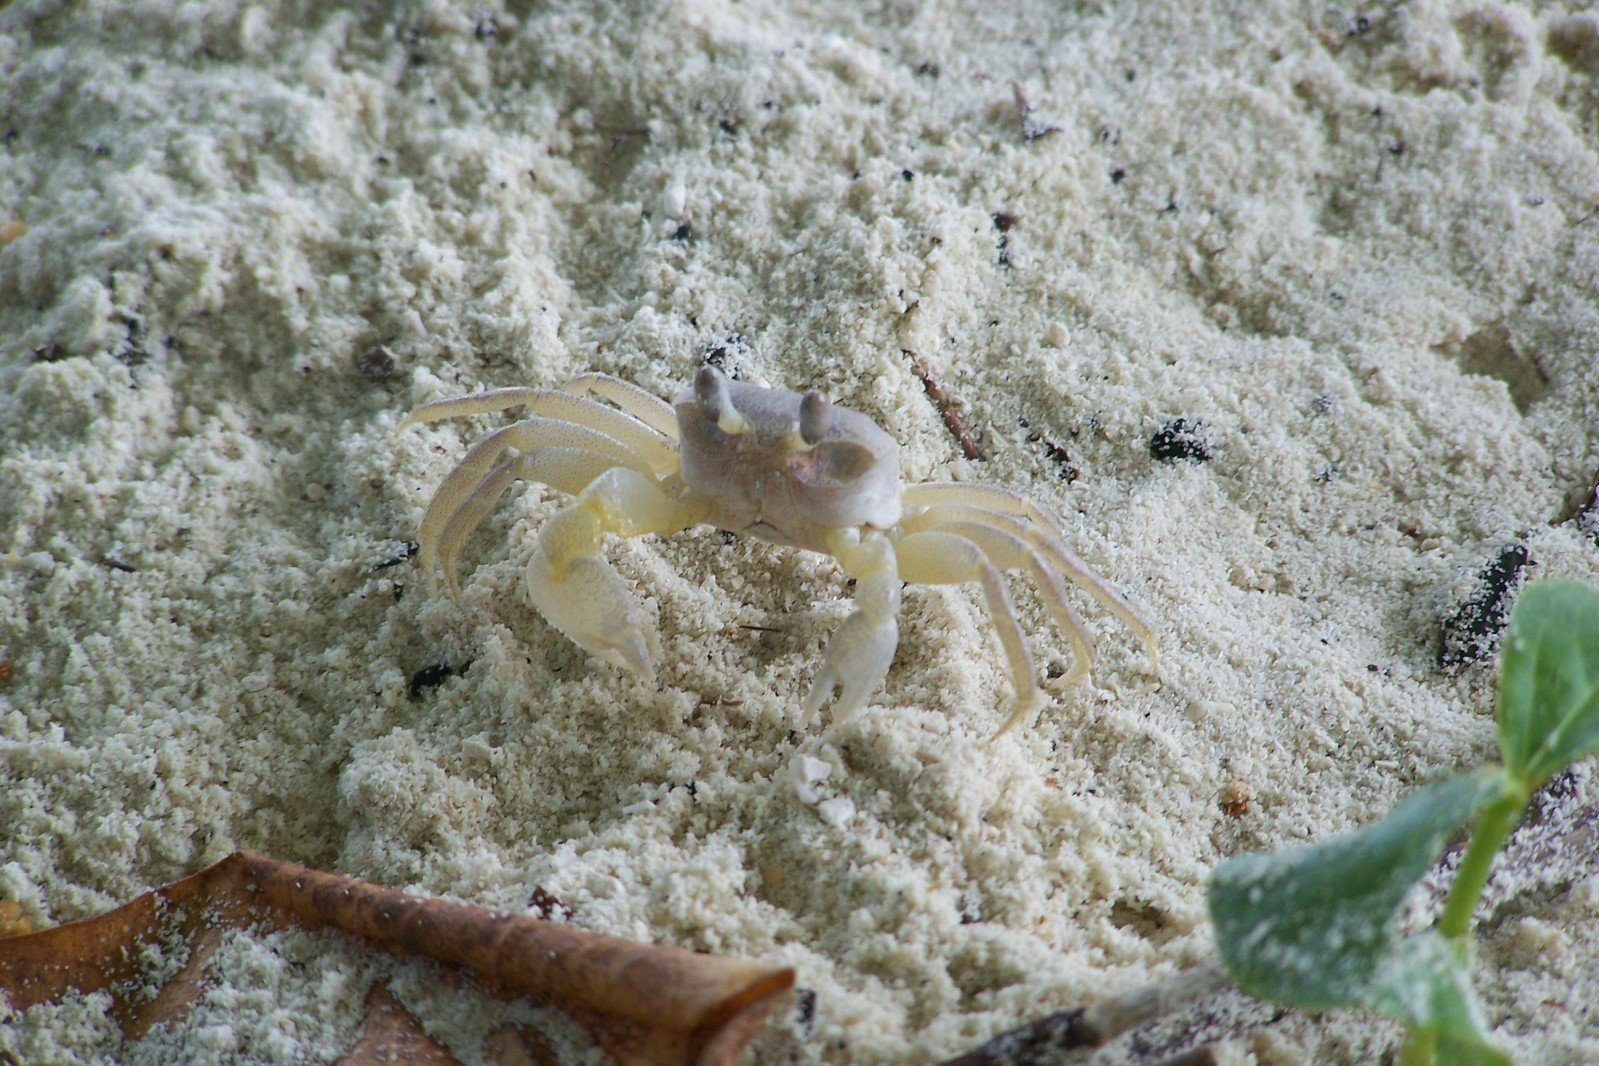 a small crab crawling along some sand